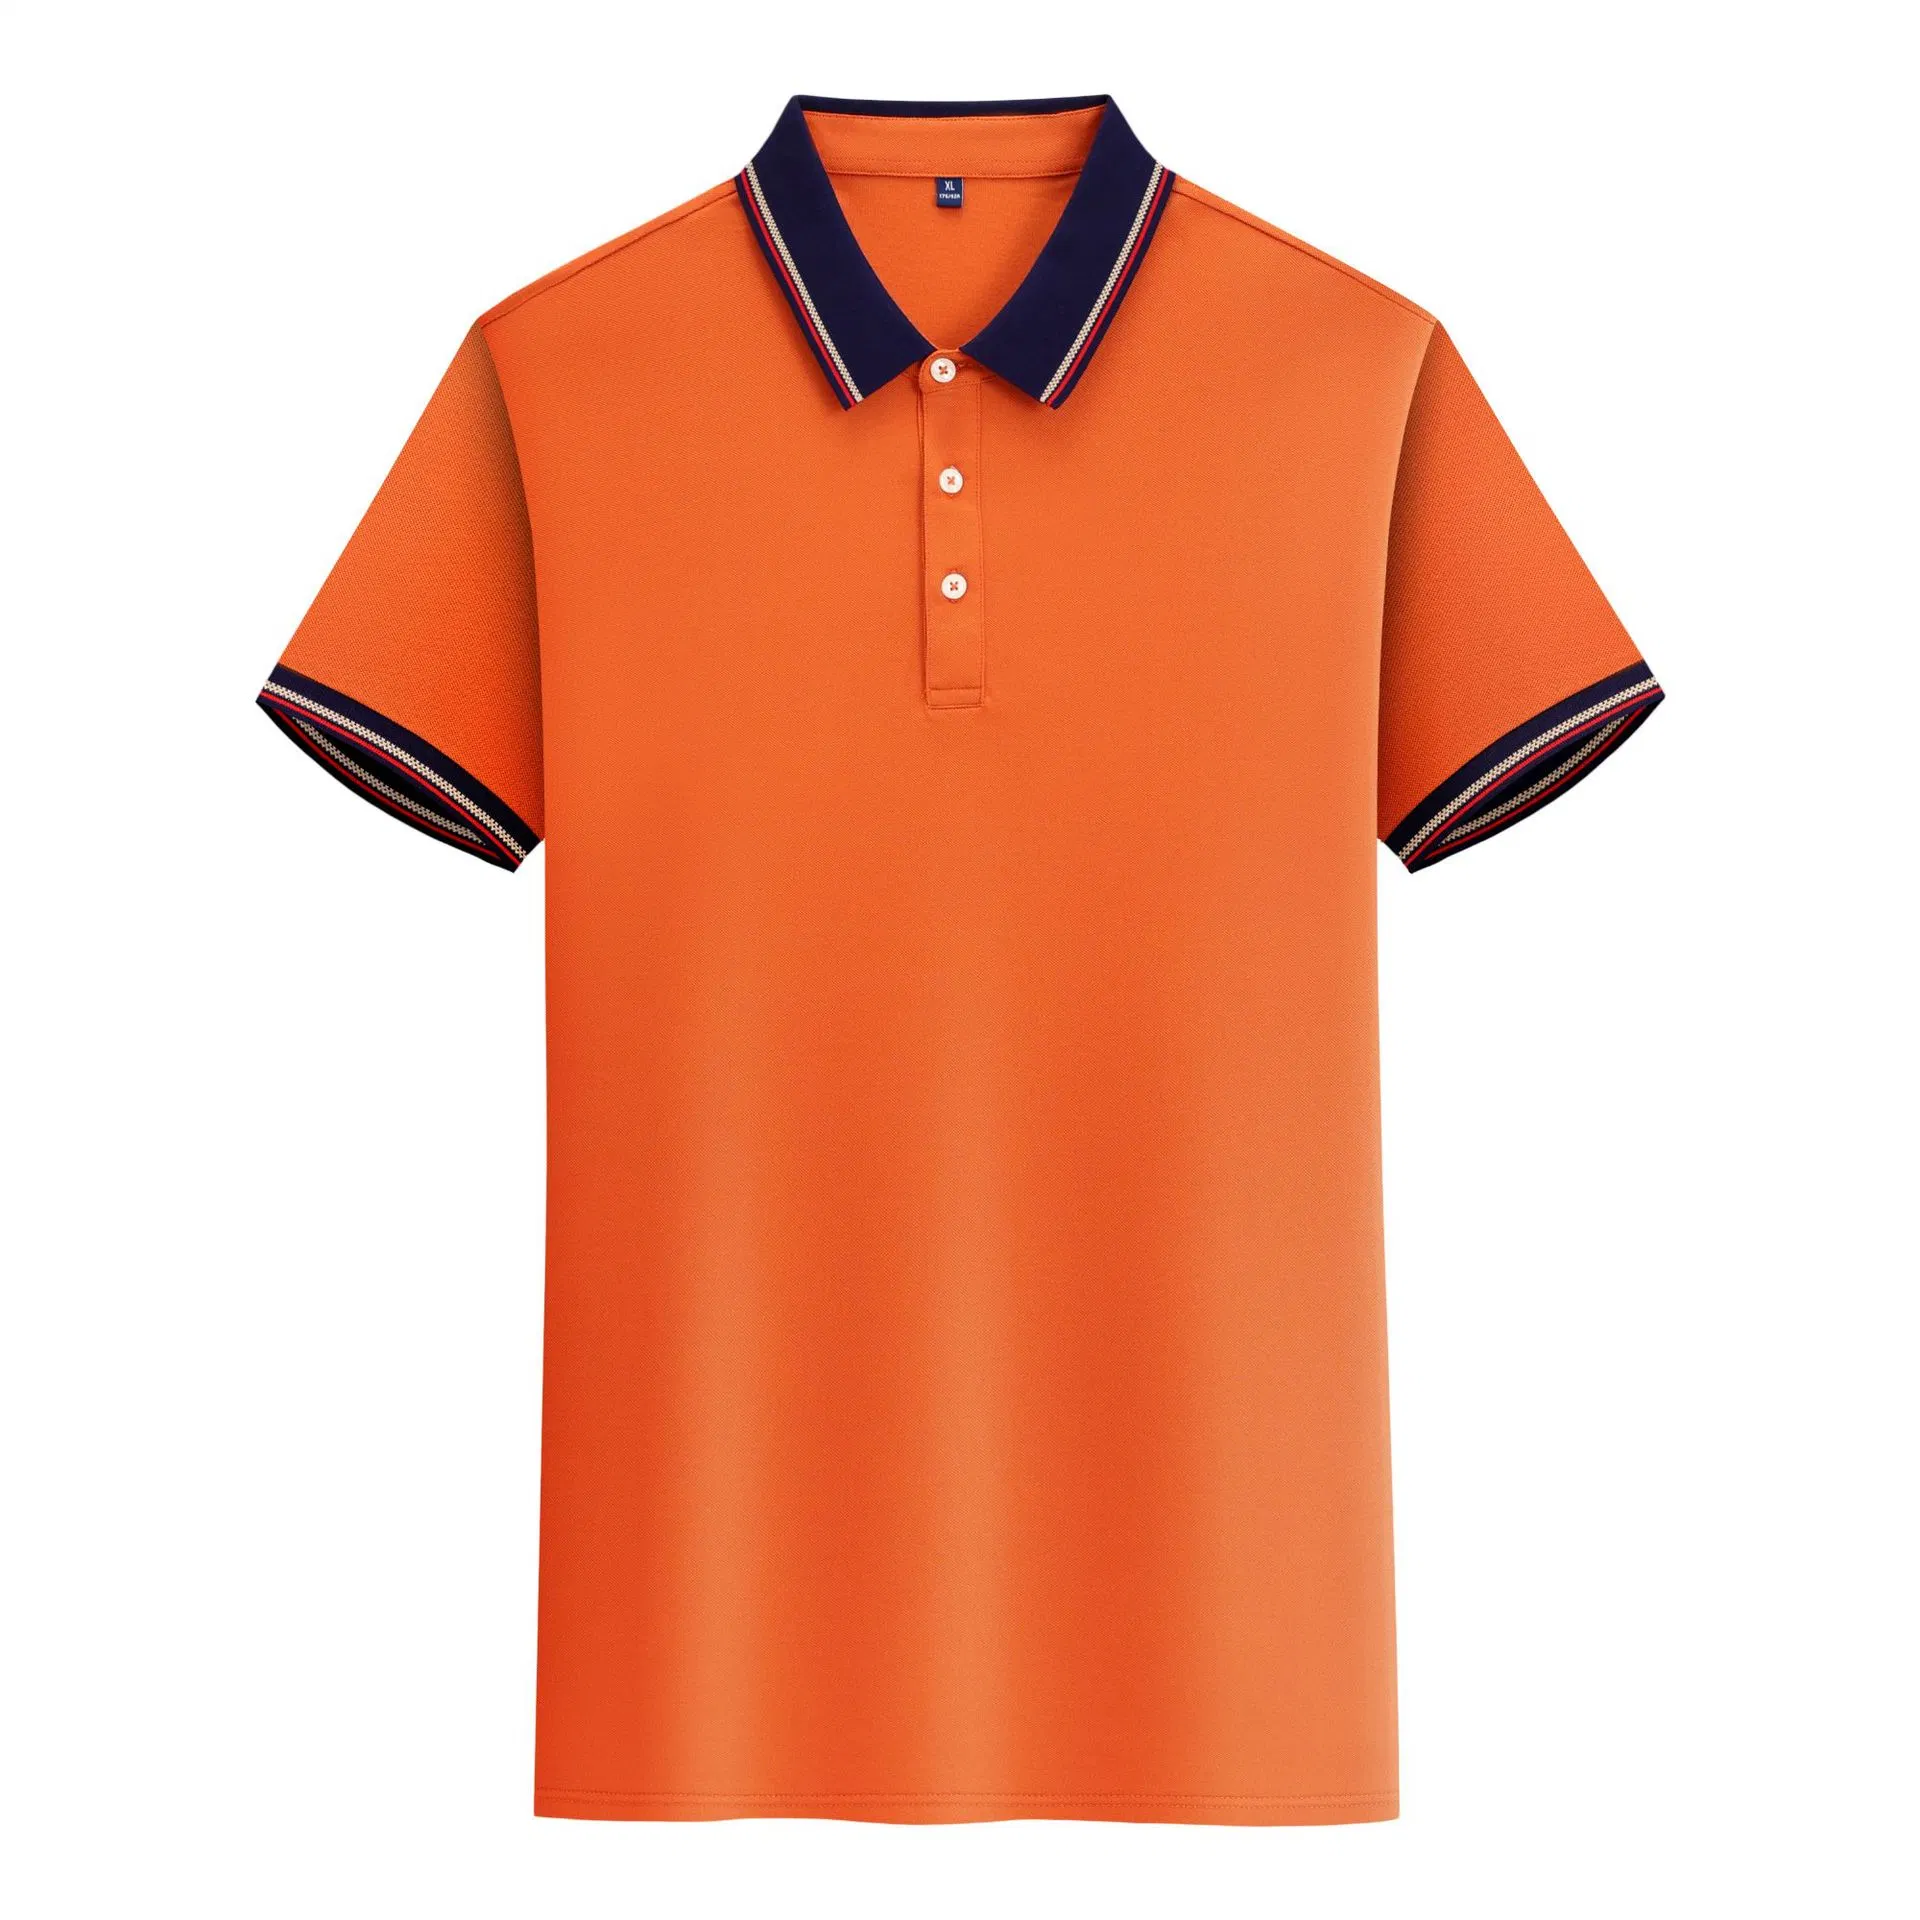 Blank Colorful Simple Polo Shirts Design